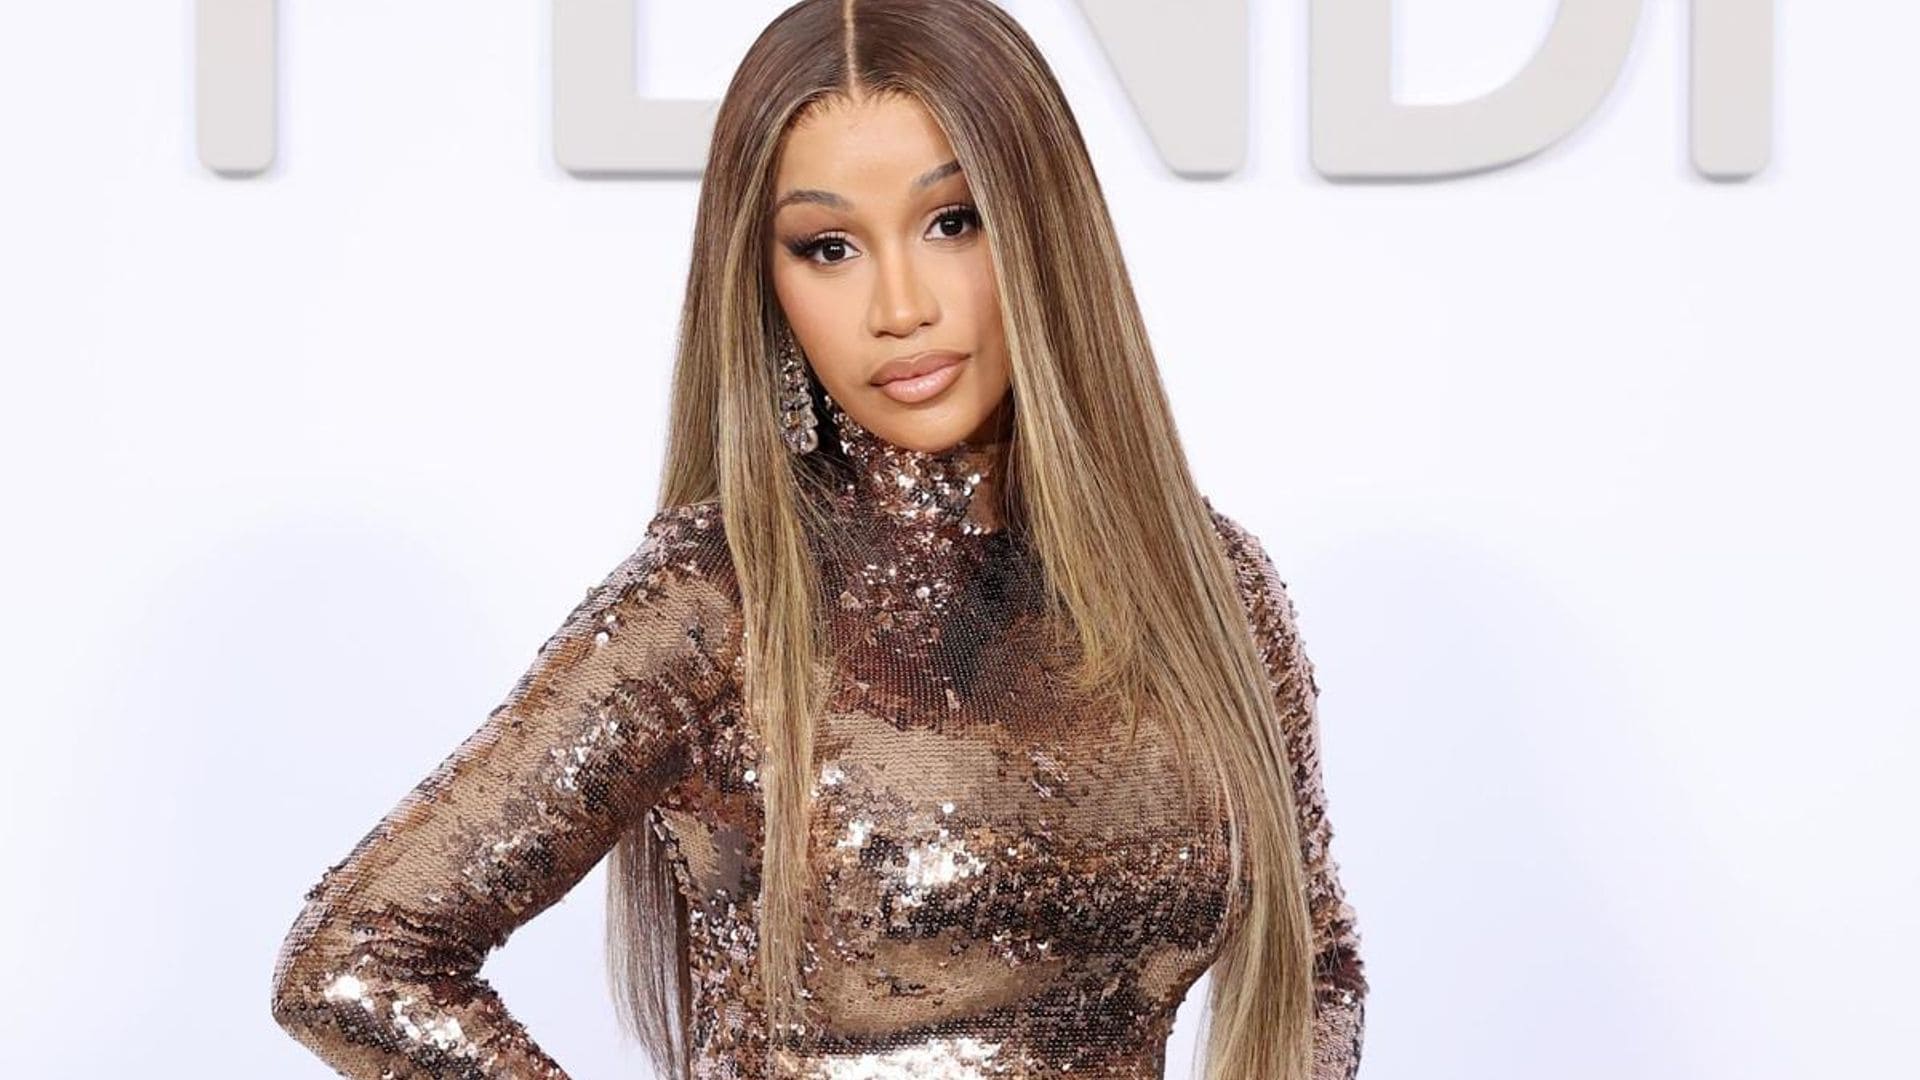 Cardi B addressed accusations of weight loss surgery and fake fitness commitment